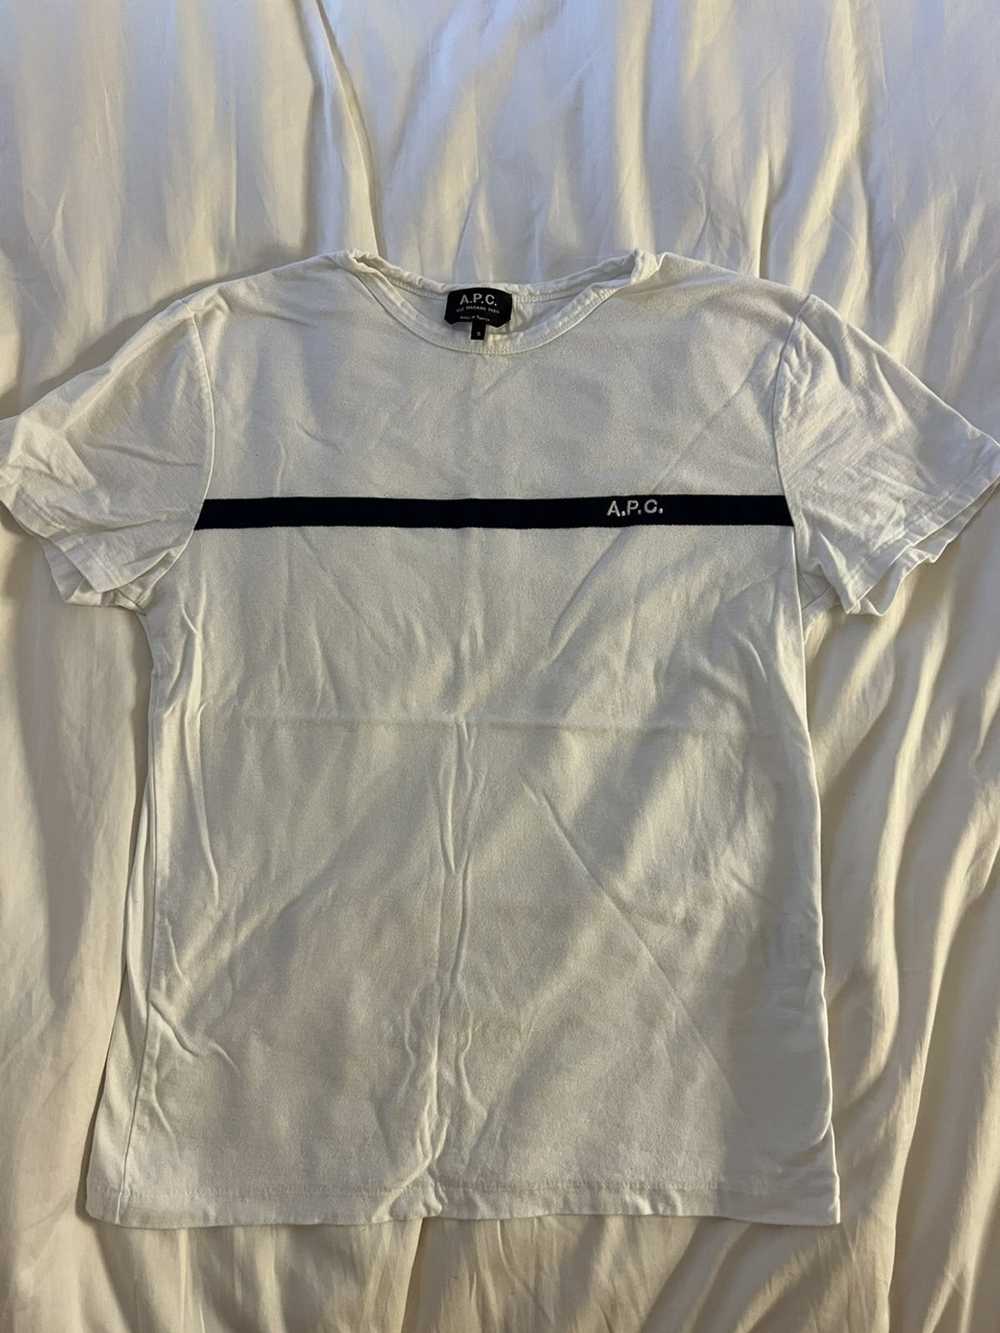 A.P.C. White A.P.C. Tshirt with Navy Stripe - image 2